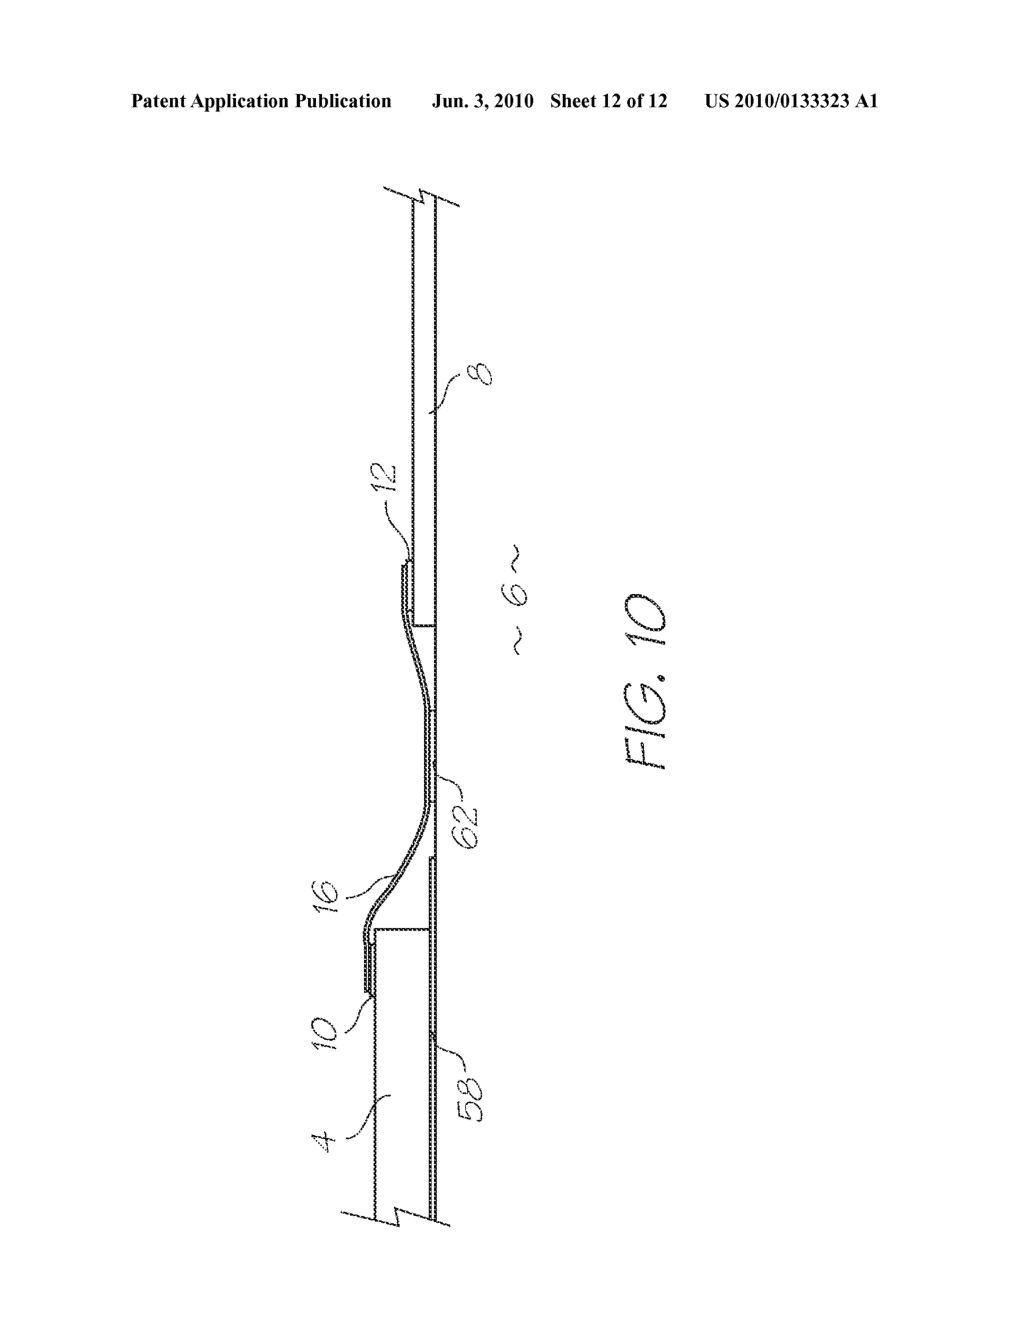 METHOD OF WIRE BONDING AN INTEGRATED CIRCUIT DIE AND A PRINTED CIRCUIT BOARD - diagram, schematic, and image 13